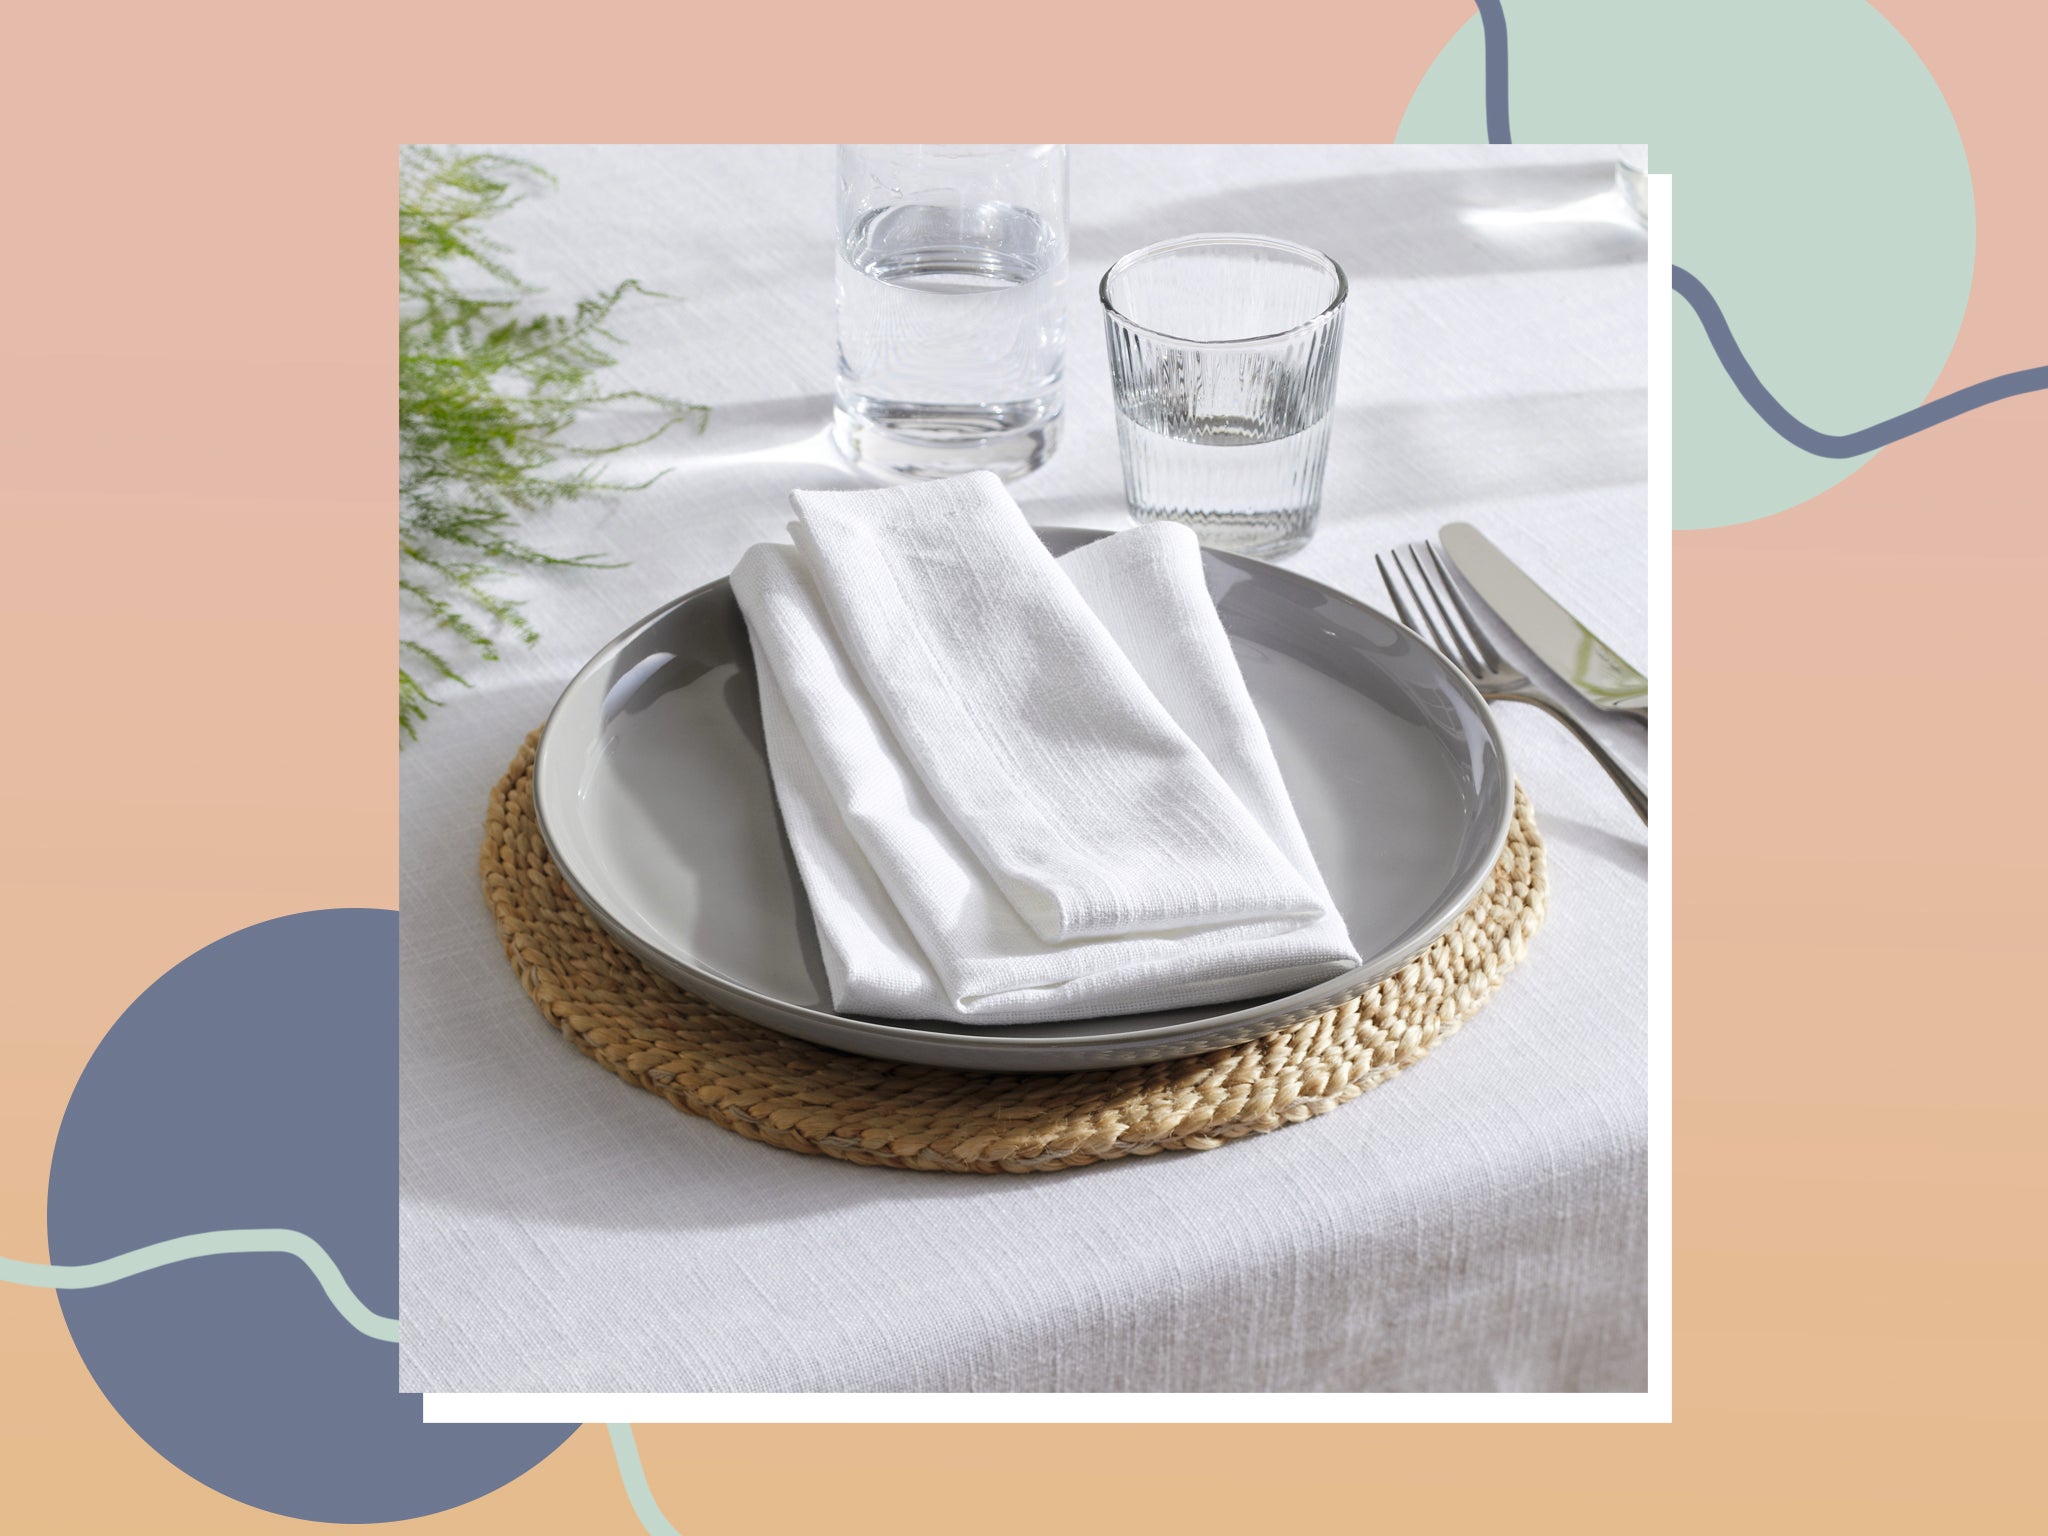 One-sided Thin Cotton Linen Cloth Napkins Placemats For Dining Table Coffee Kitchen Place Mat Set of 2 